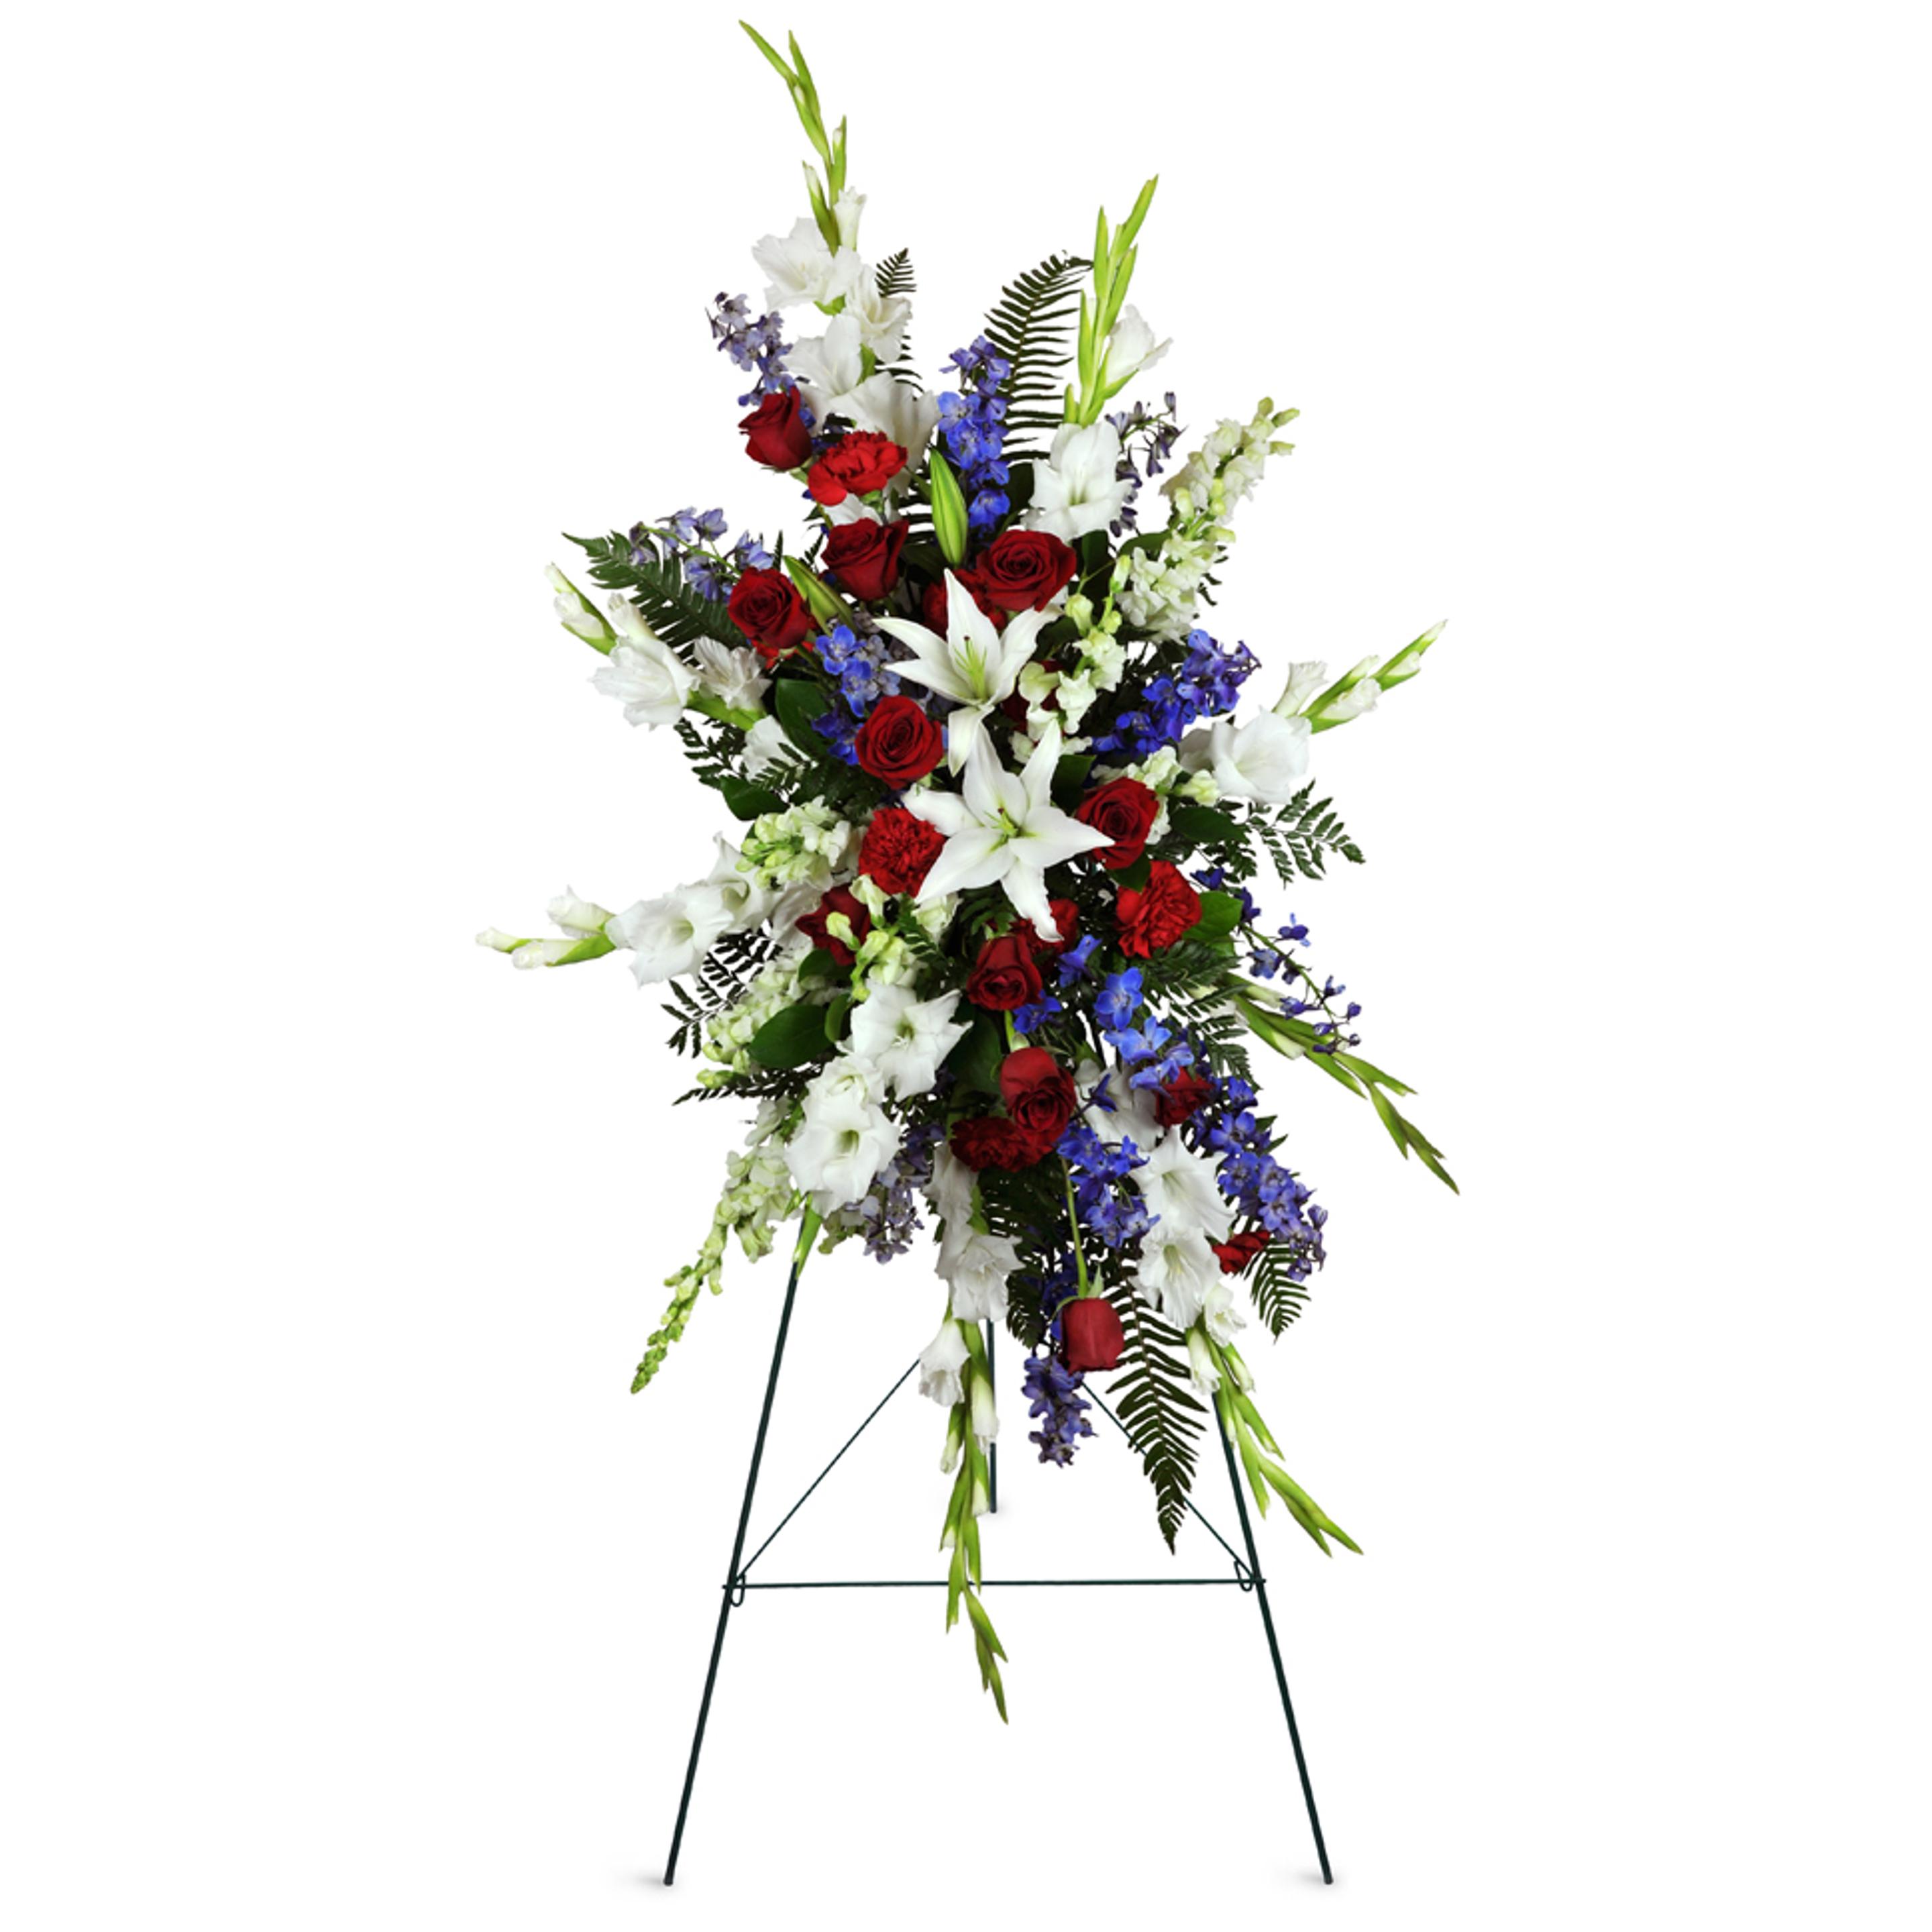 A standing spray with white, red, blue, and green flowers. Tall and elegant as a tribute for funerals.